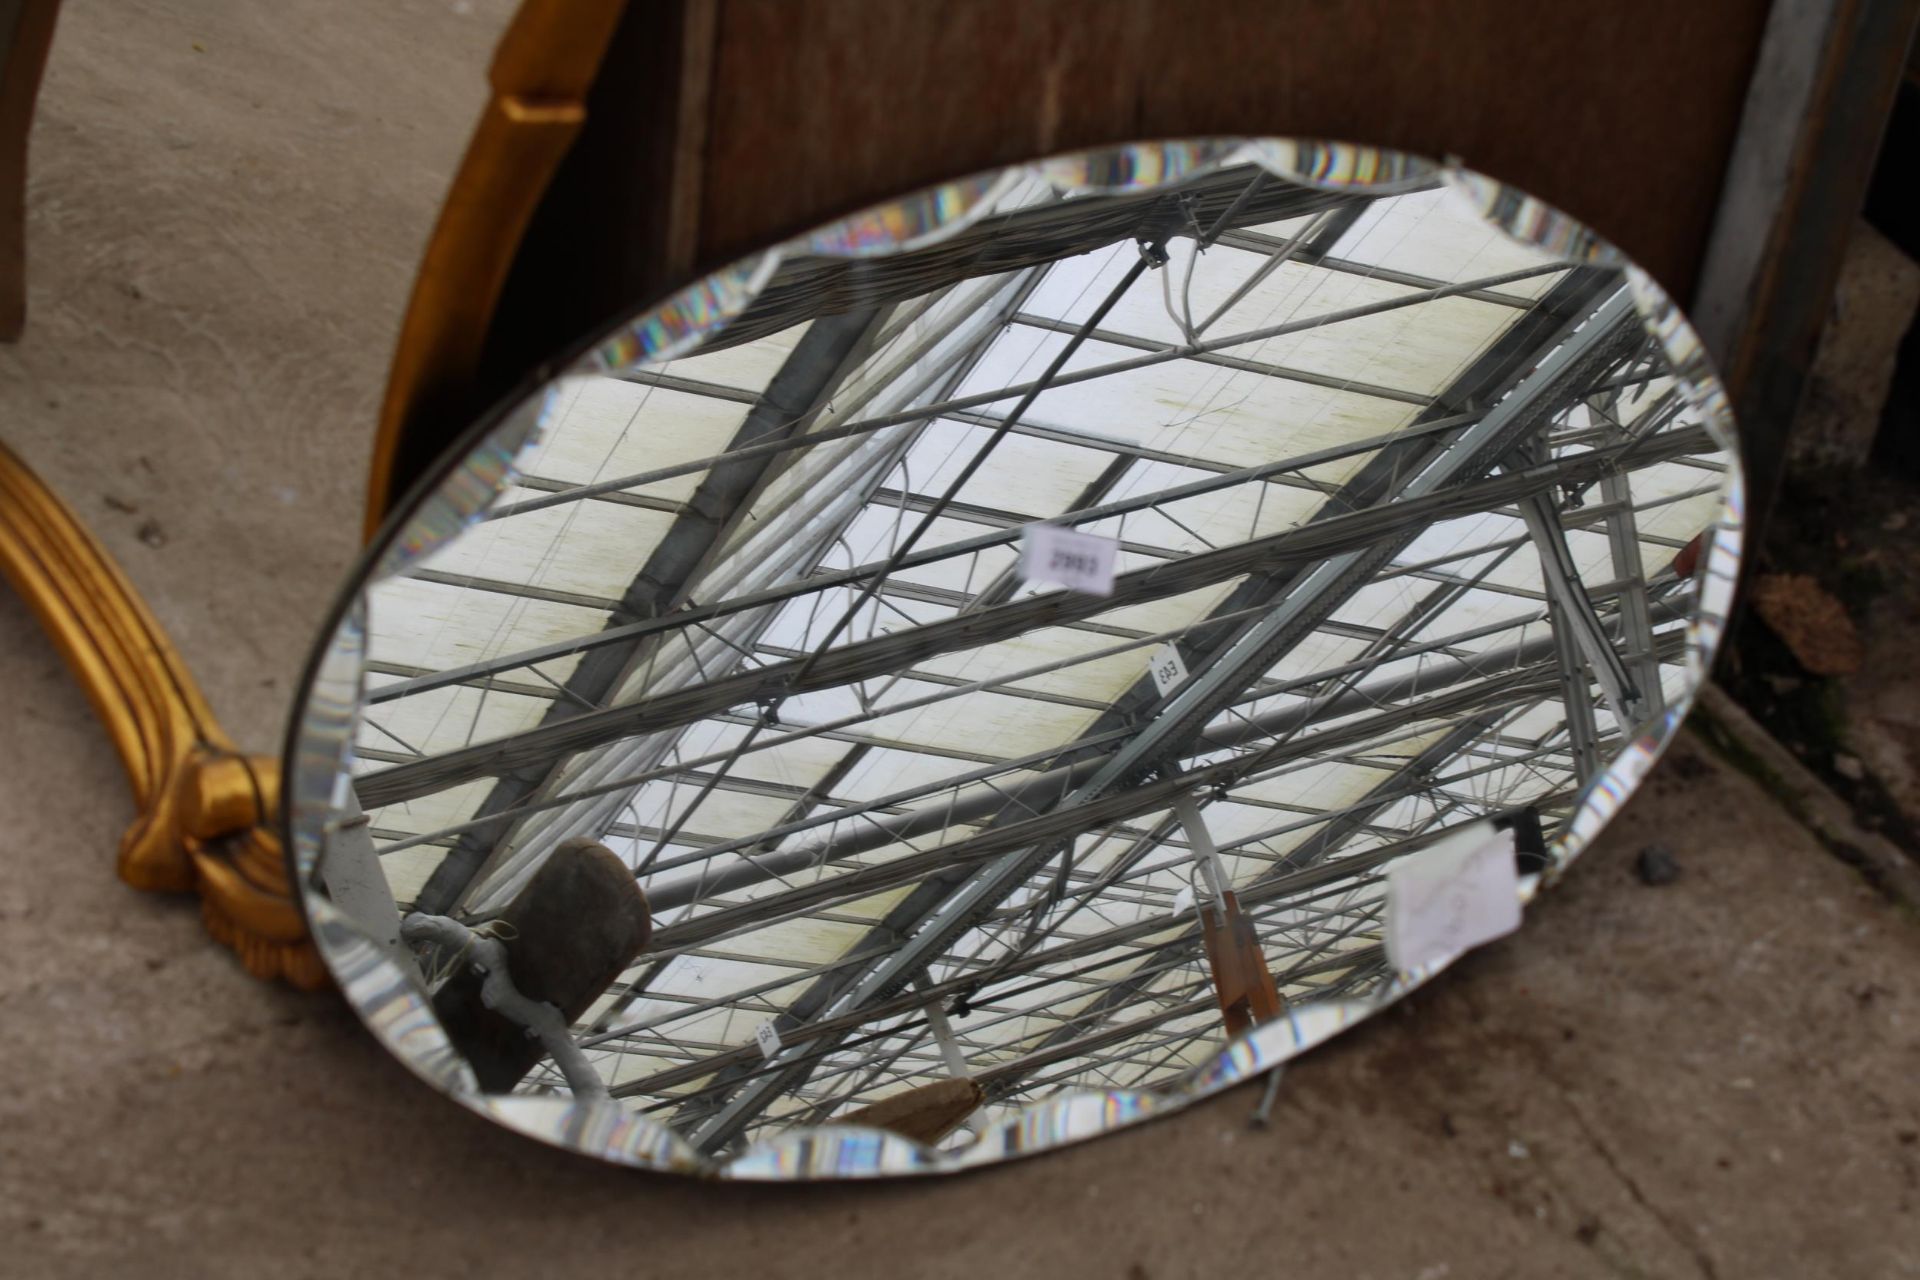 AN OVAL FRAMELESS WALL MIRROR, 26" X 15" - Image 2 of 2